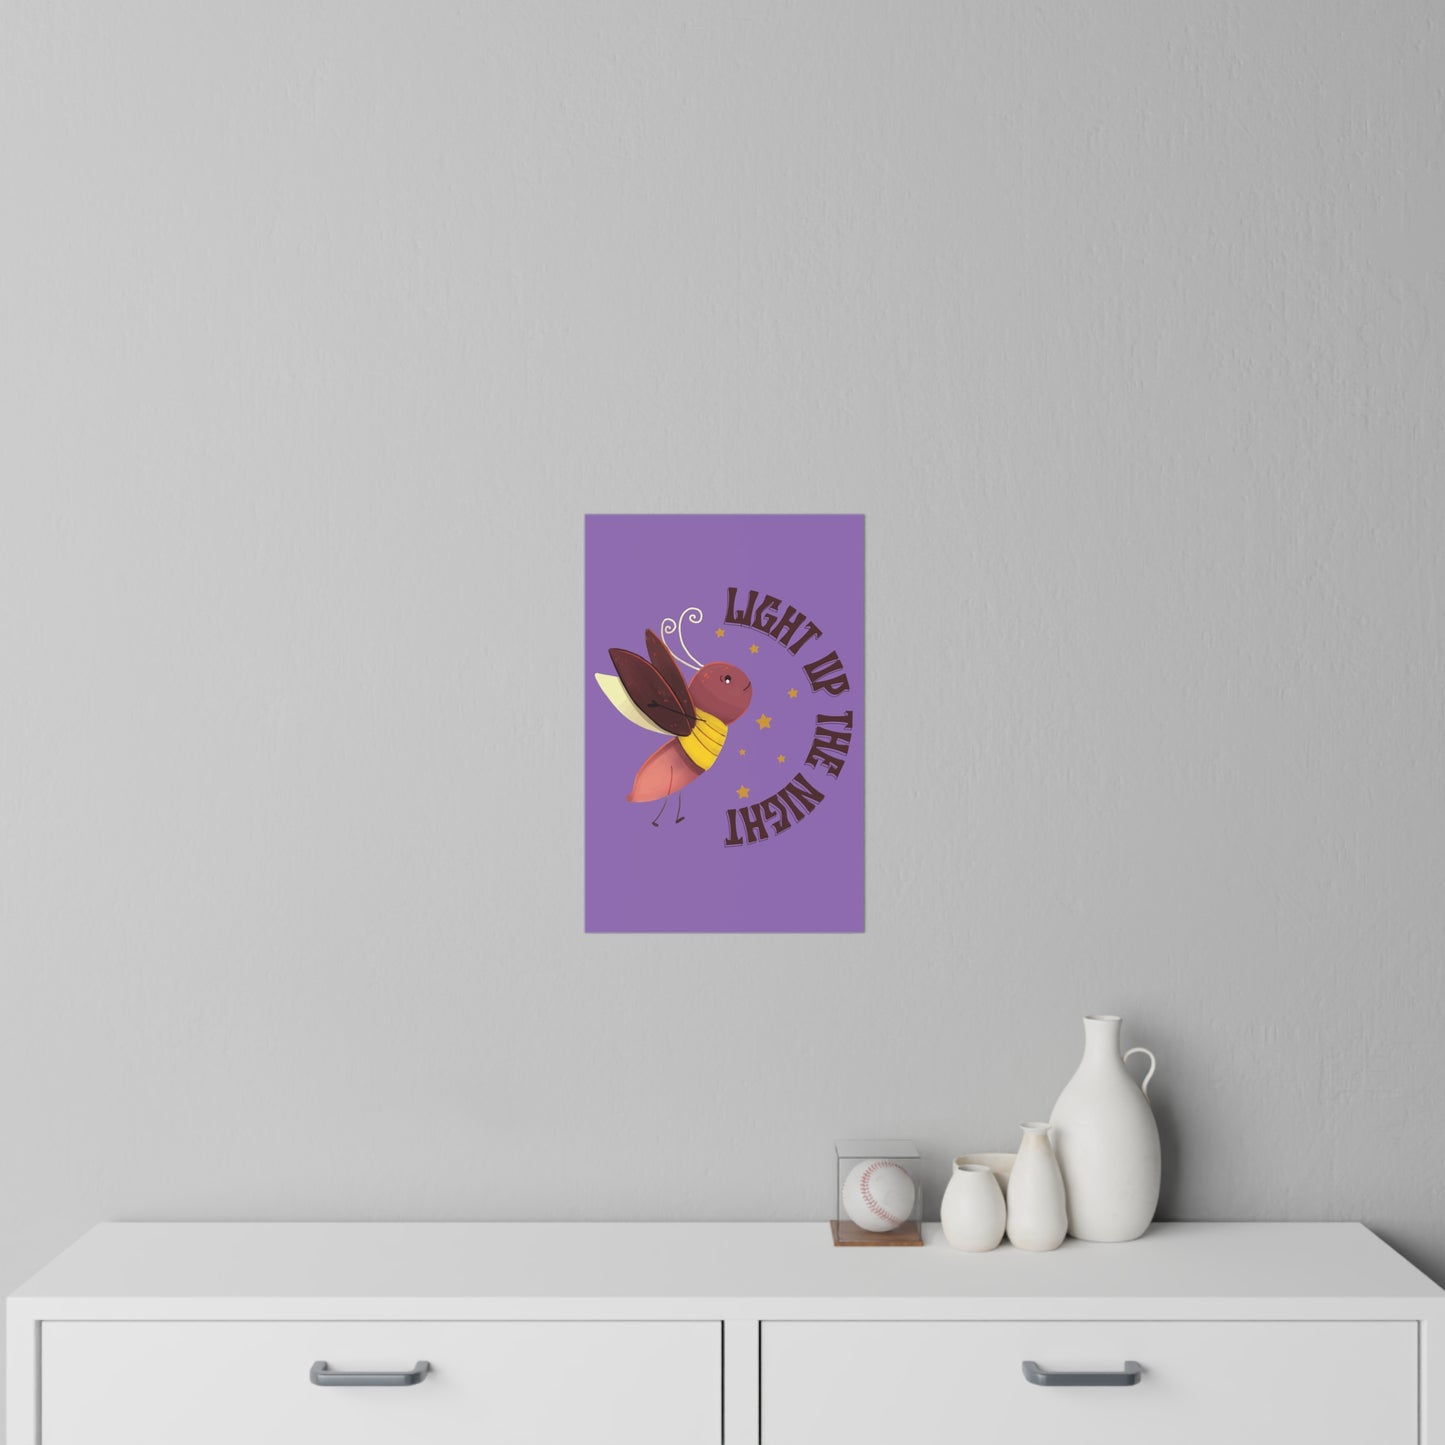 Wall Decals - Light Up the Night